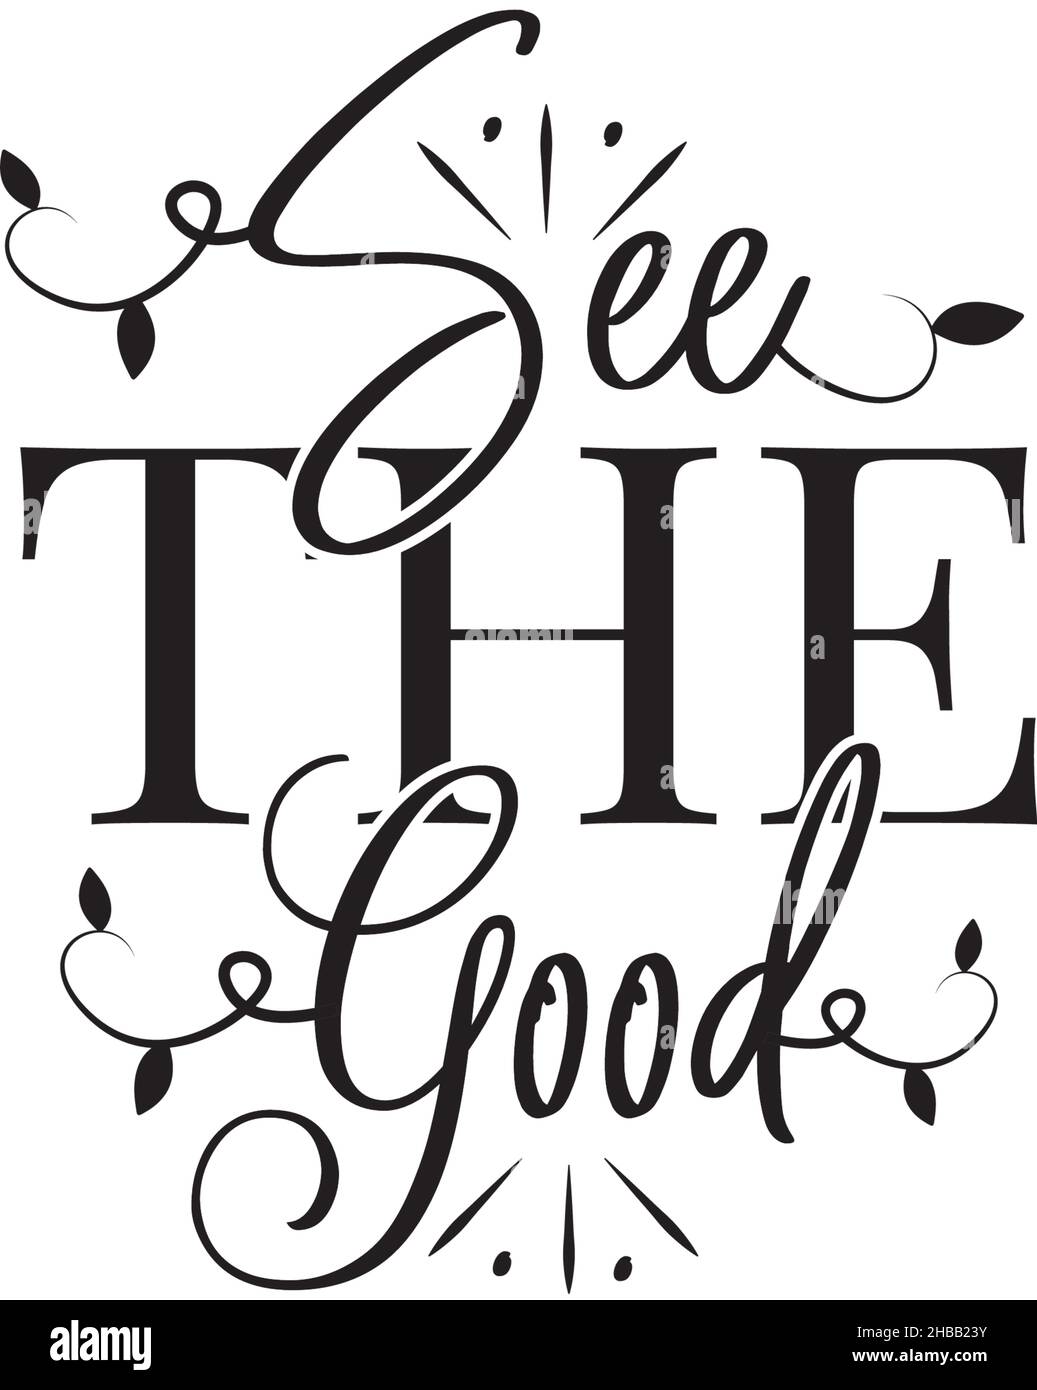 See the good, vector. Motivational inspirational positive life quote ...